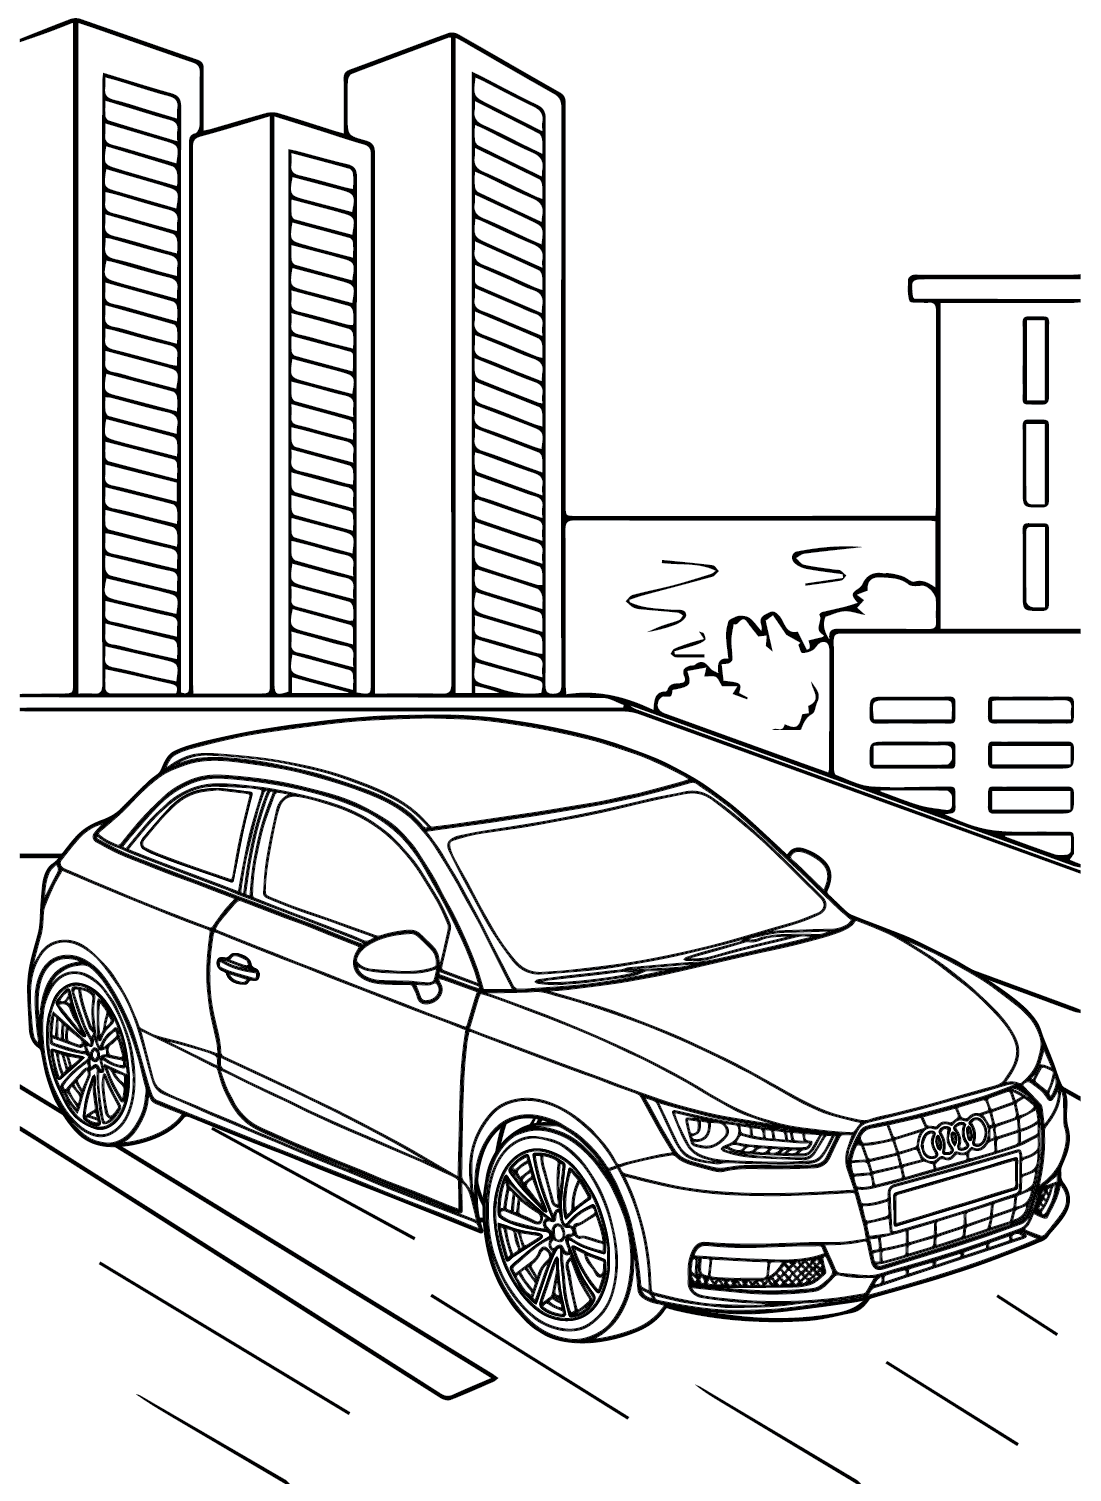 Audi A1 Coloring Pages to Printable from Audi